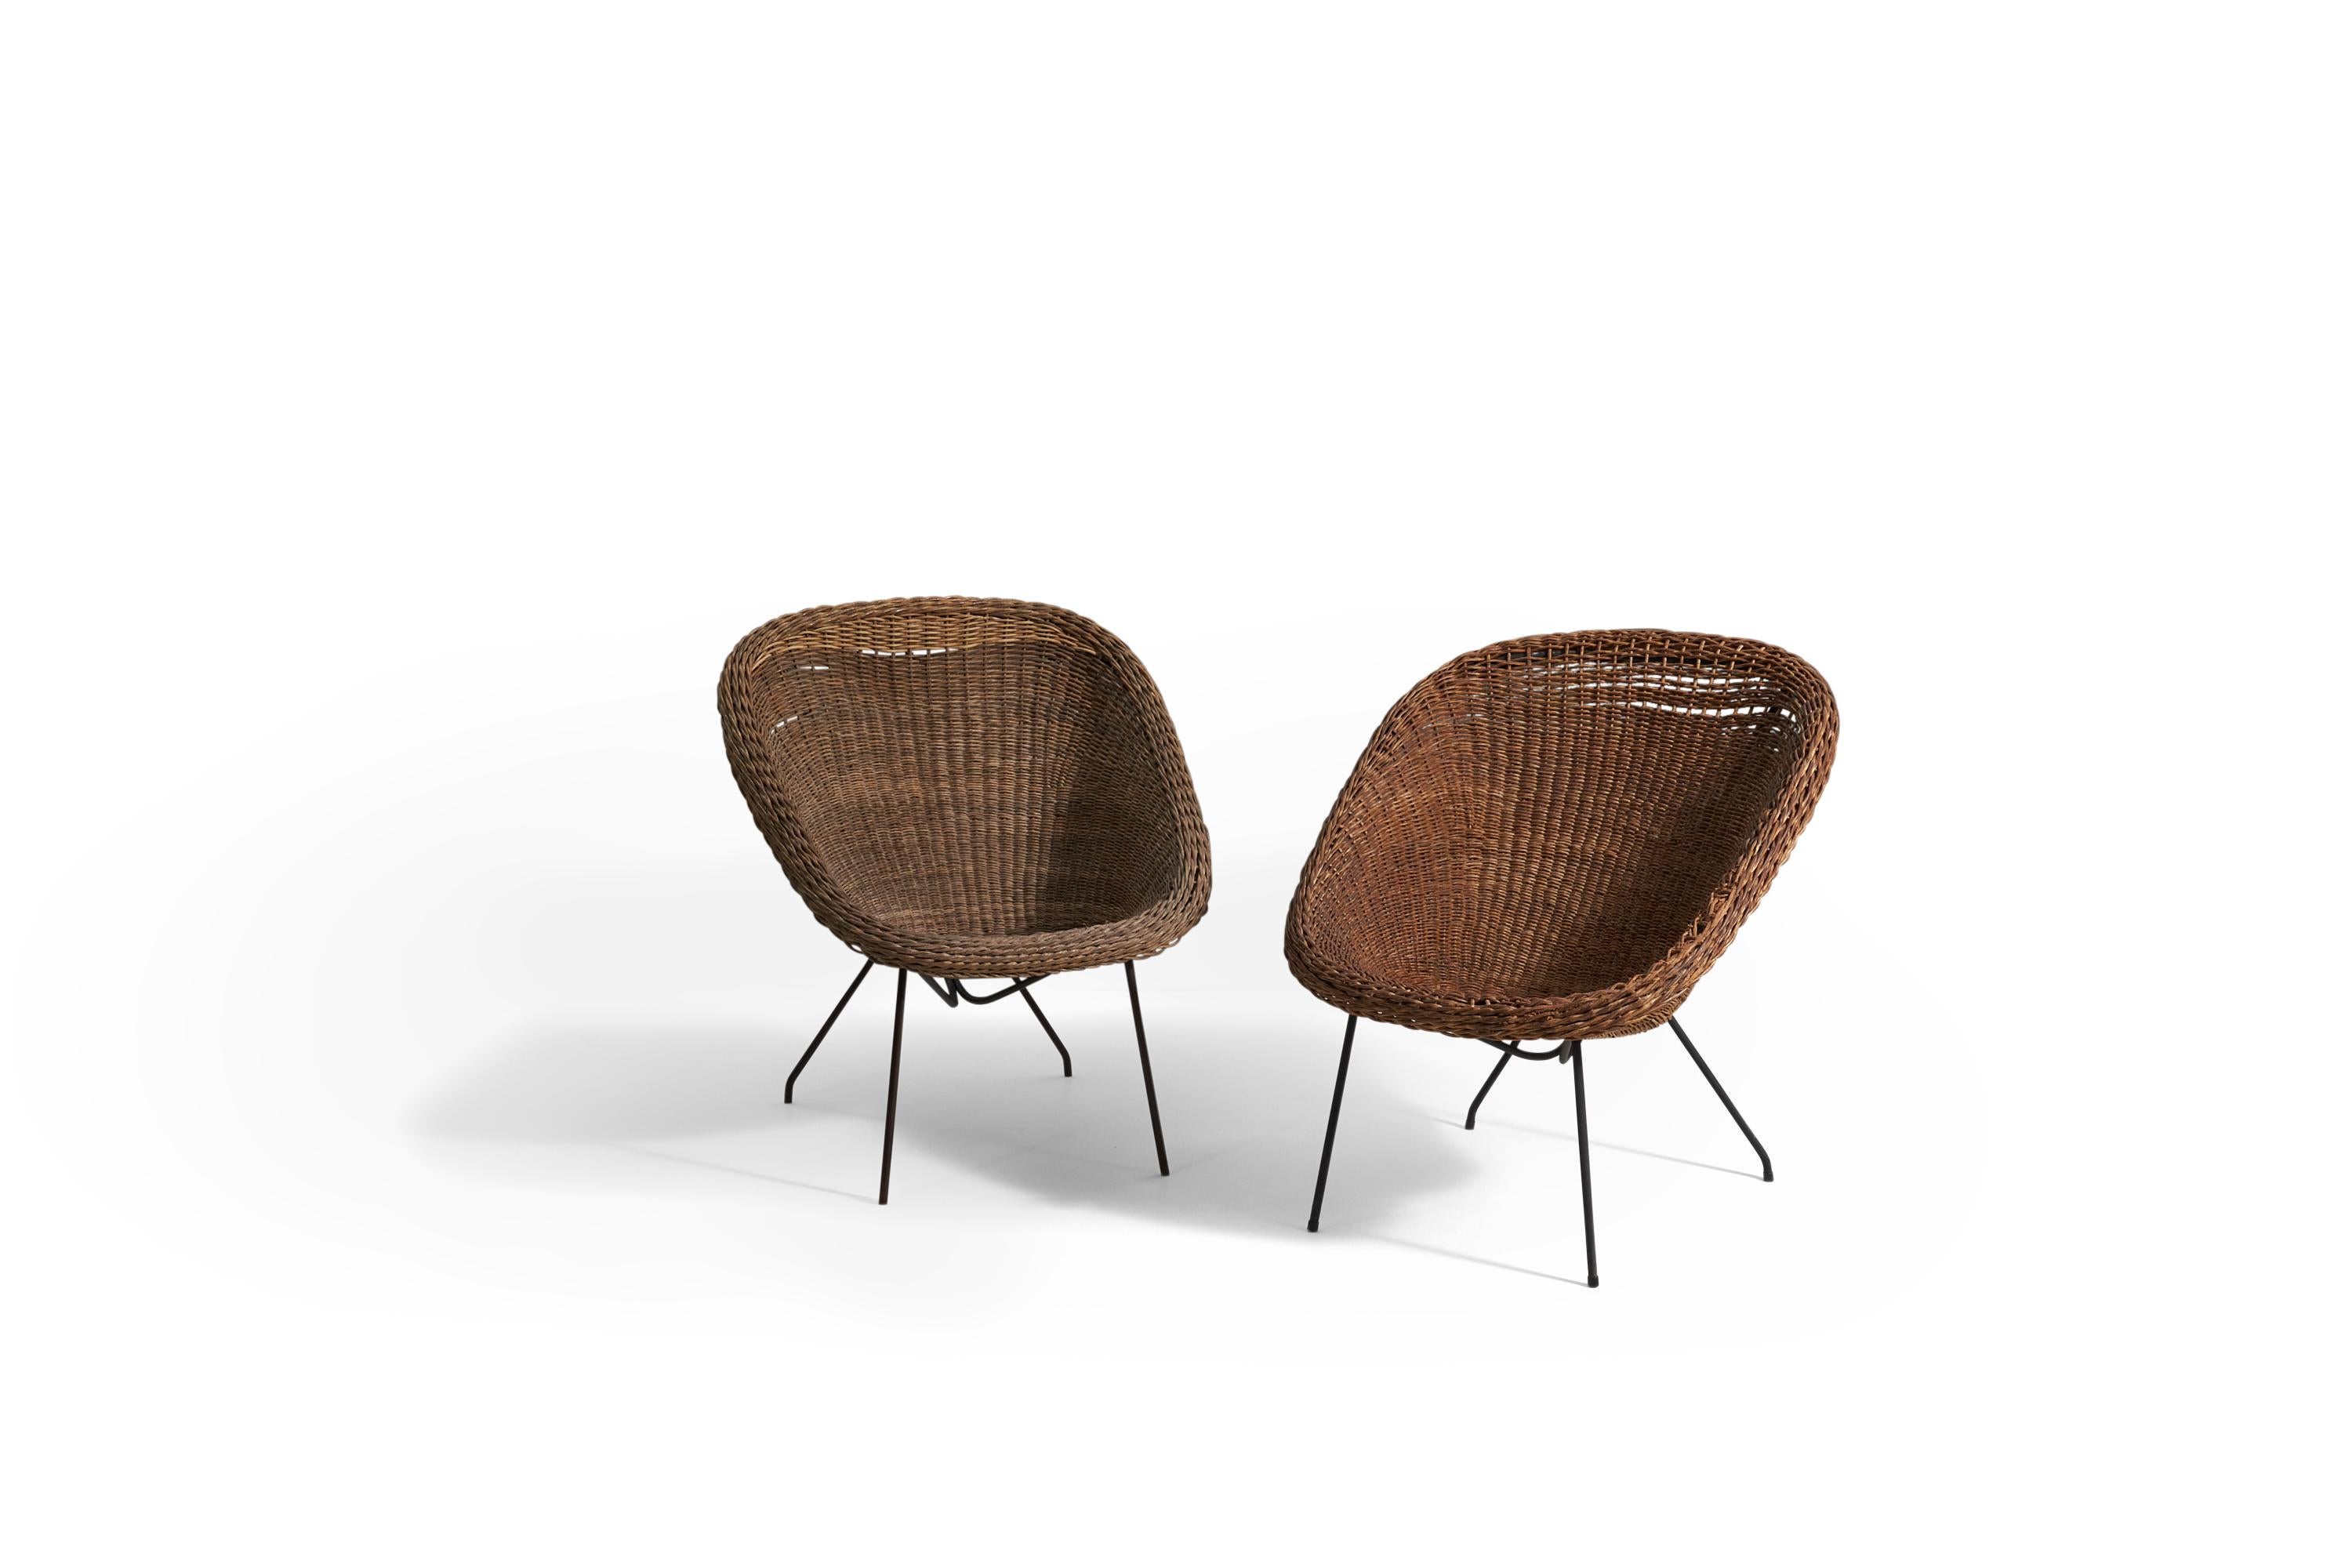 A pair of rattan and steel lounge chairs designed by Martin Eisler and Carlo Hauner and produced by Forma, Brazil, c. 1955. 
